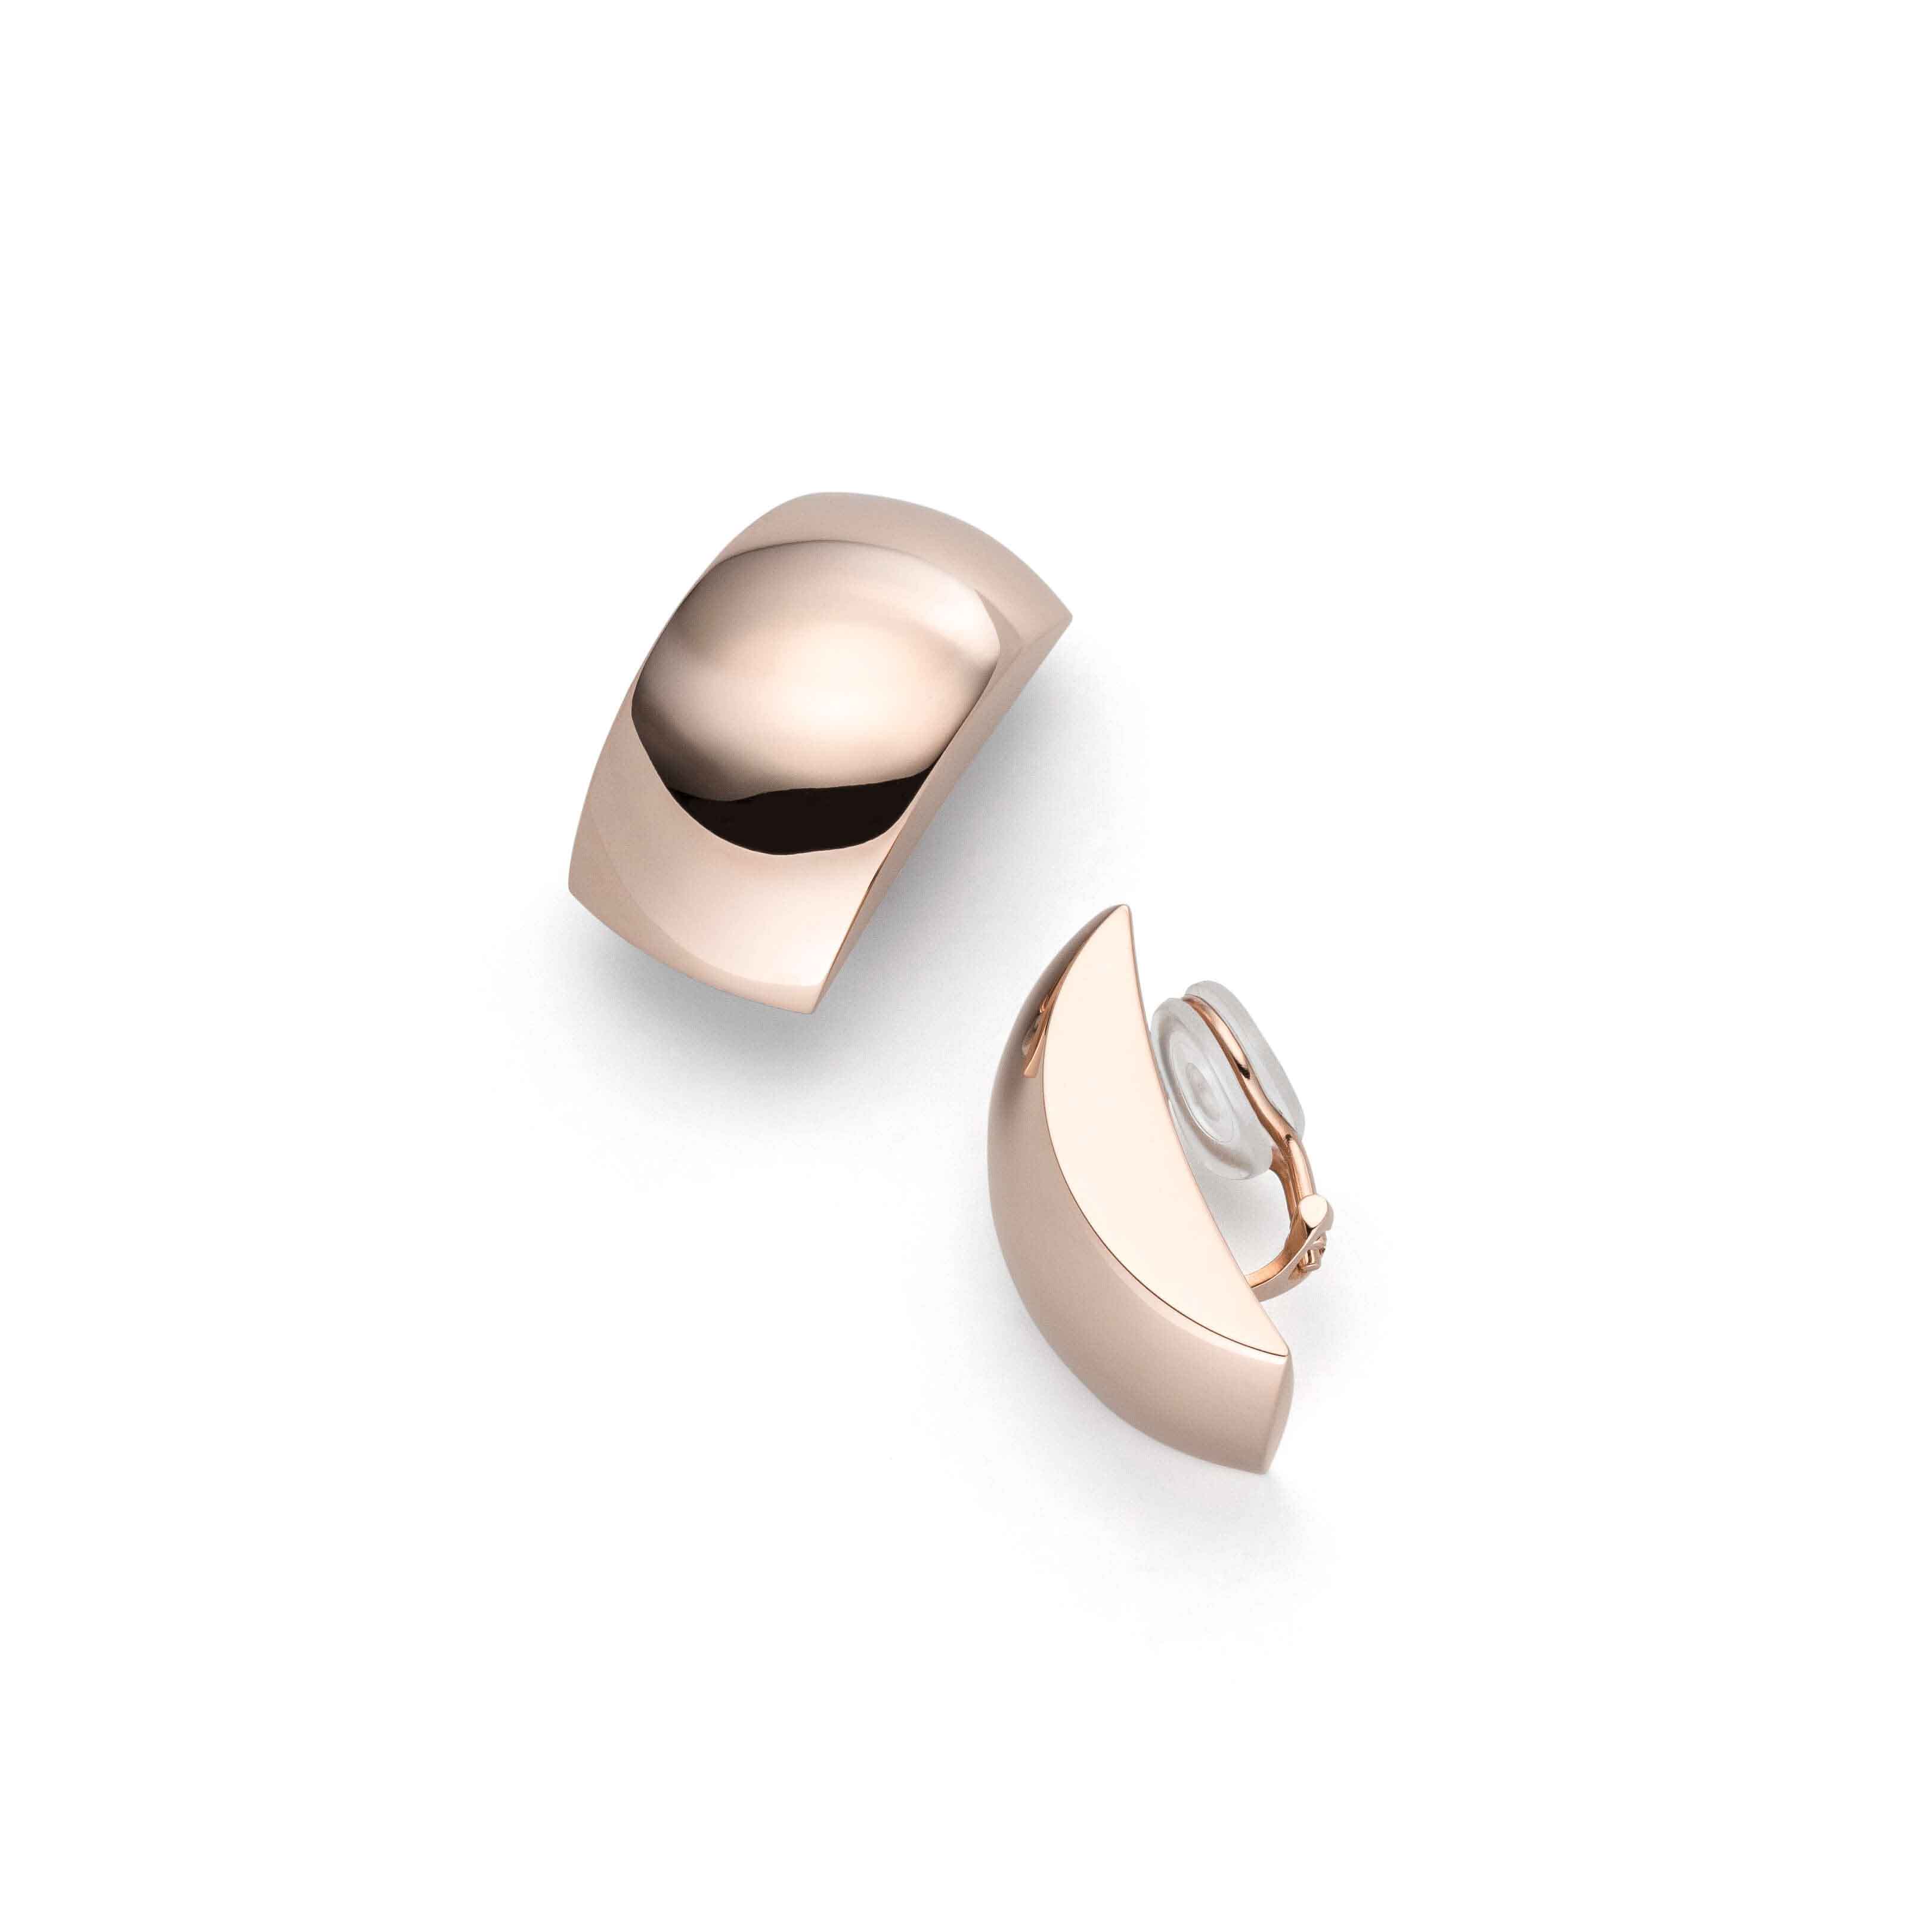 Wholesale OEM/ODM Jewelry customized rose gold stud earrings Wholesale Silver Jewelry Supplier